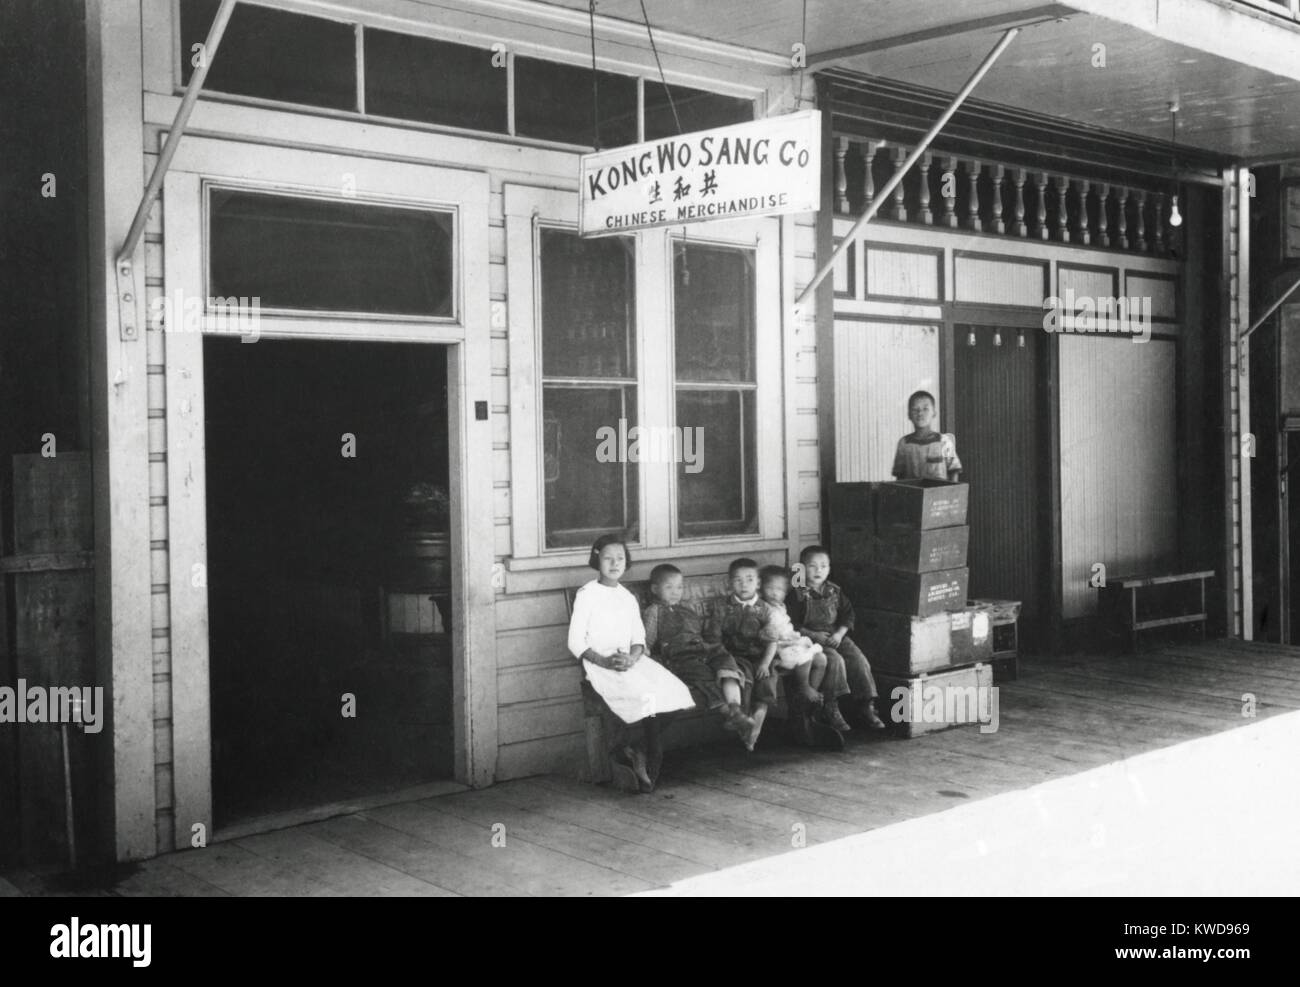 Six Chinese children sit outside the Kong Wo Sang Company in 1926. They are in Newcastle, California, now a small town about 20 miles northwest of Sacramento. It had been a Gold Rush boom town in the 1850s and was on the first line Central Pacific Railroa (BSLOC 2016 8 84) Stock Photo